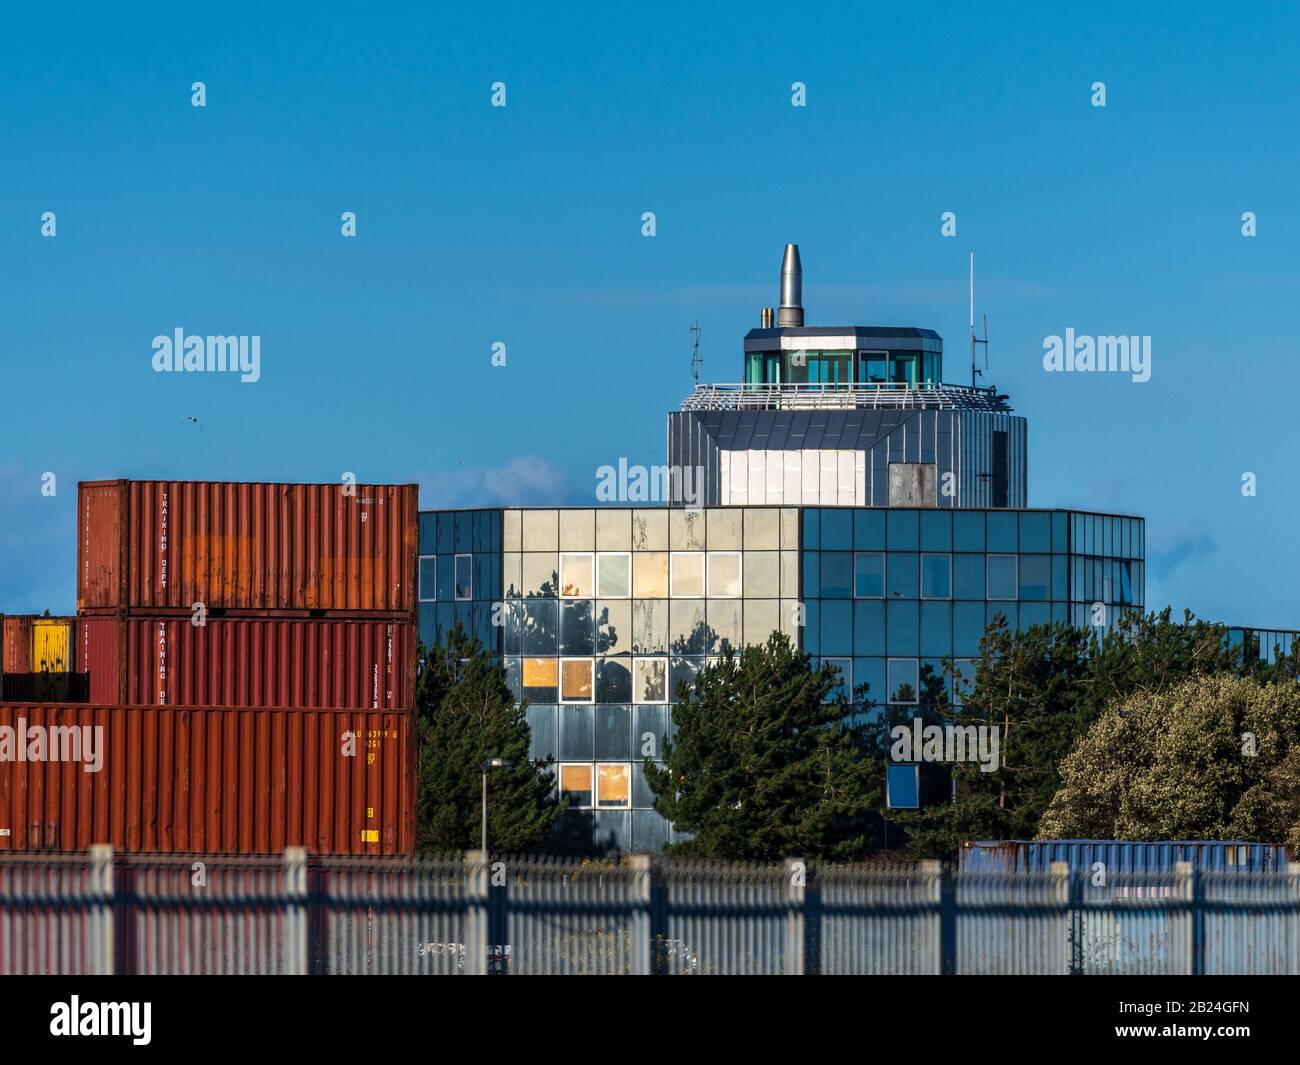 Custom House Port of Felixstowe overlooking the container port - HM Revenue and Customs offices at Felixstowe Port. HMRC Custom House Stock Photo